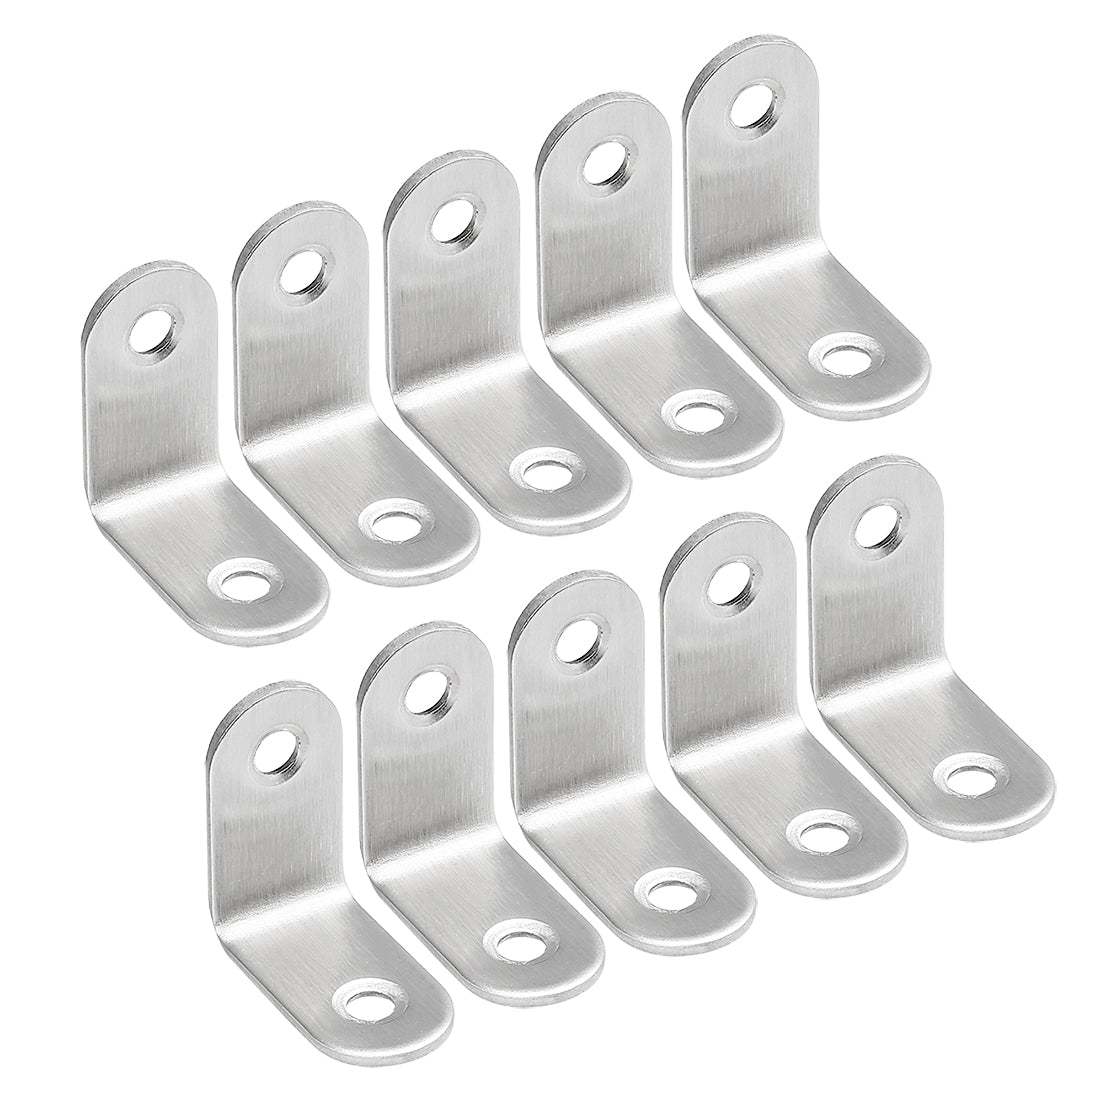 uxcell Uxcell 10pcs 25mmx25mmx16mm Stainless Steel Corner Brace Joint L Shape Right Angle Bracket Fastener